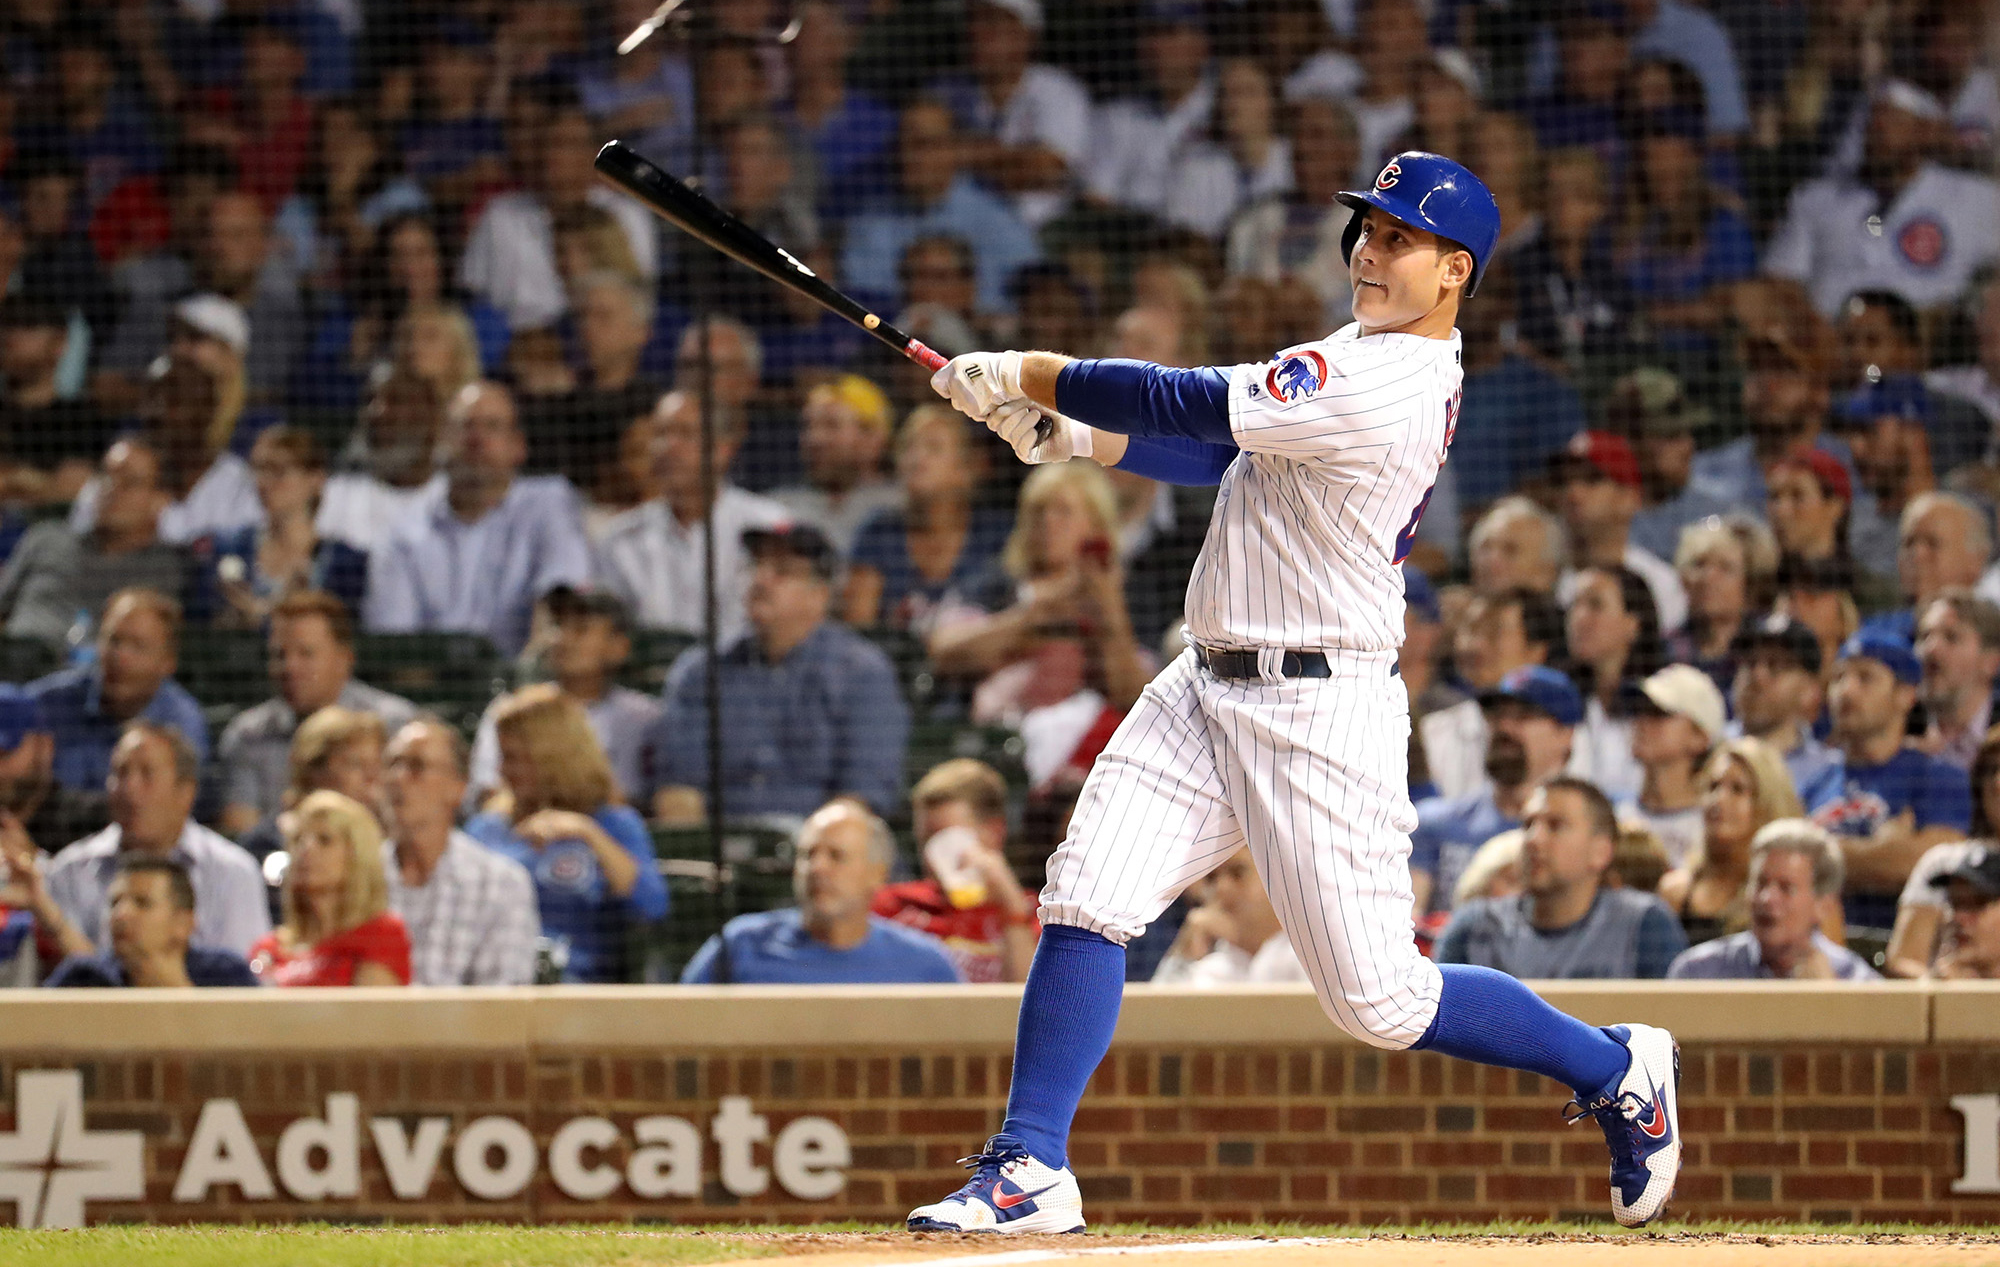 Anthony Rizzo Ends HR Dry Spell, Credits To Coach, Singer